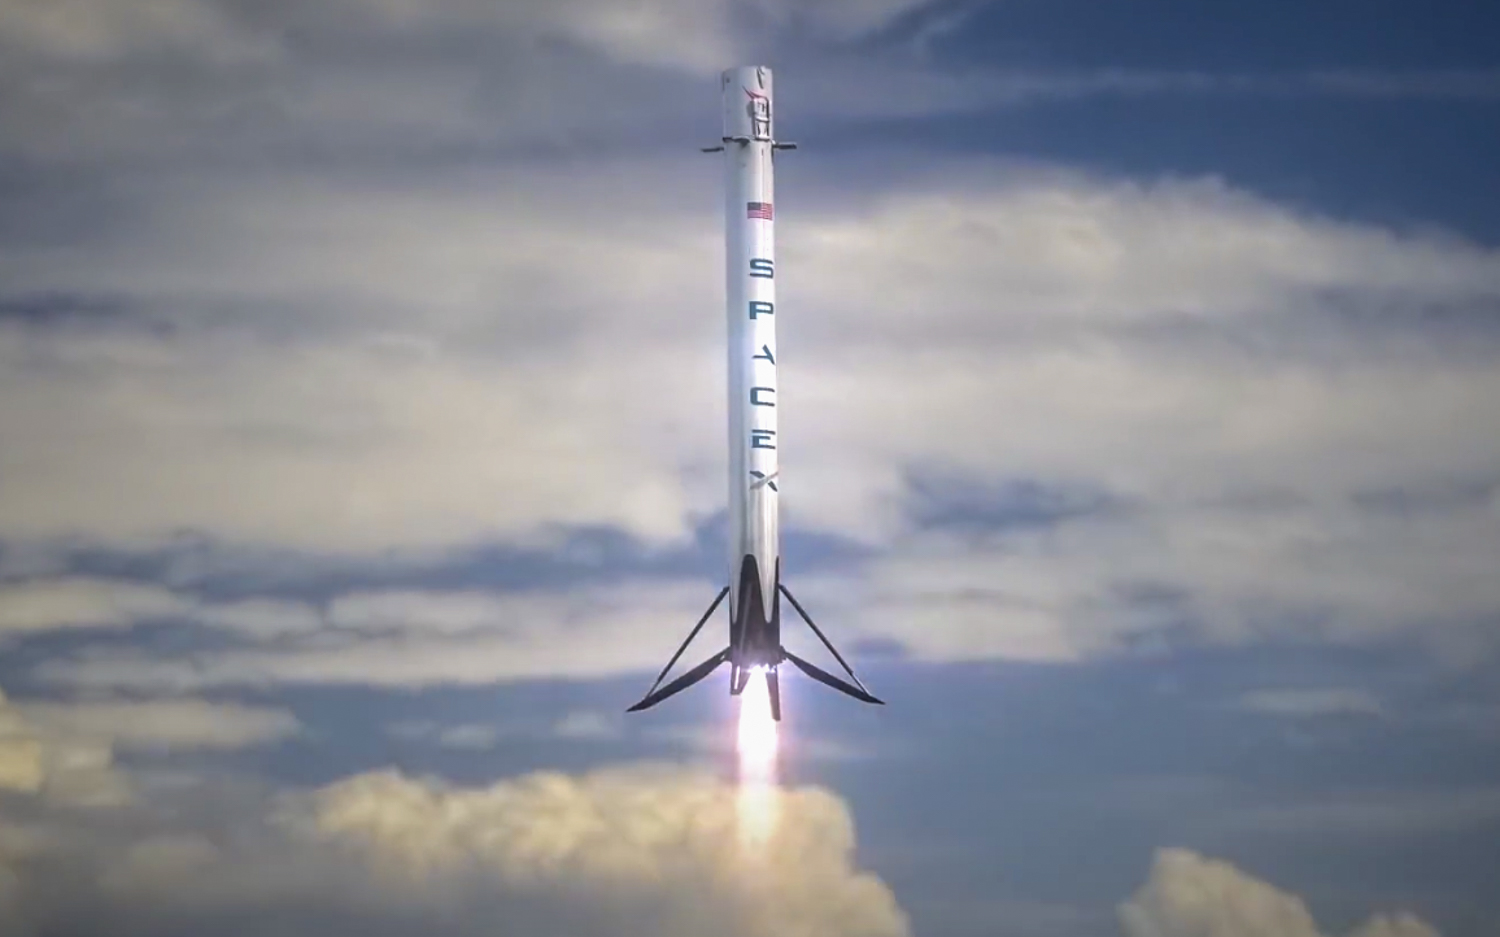 SpaceX successfully landed a Falcon 9 rocket for the 11th time